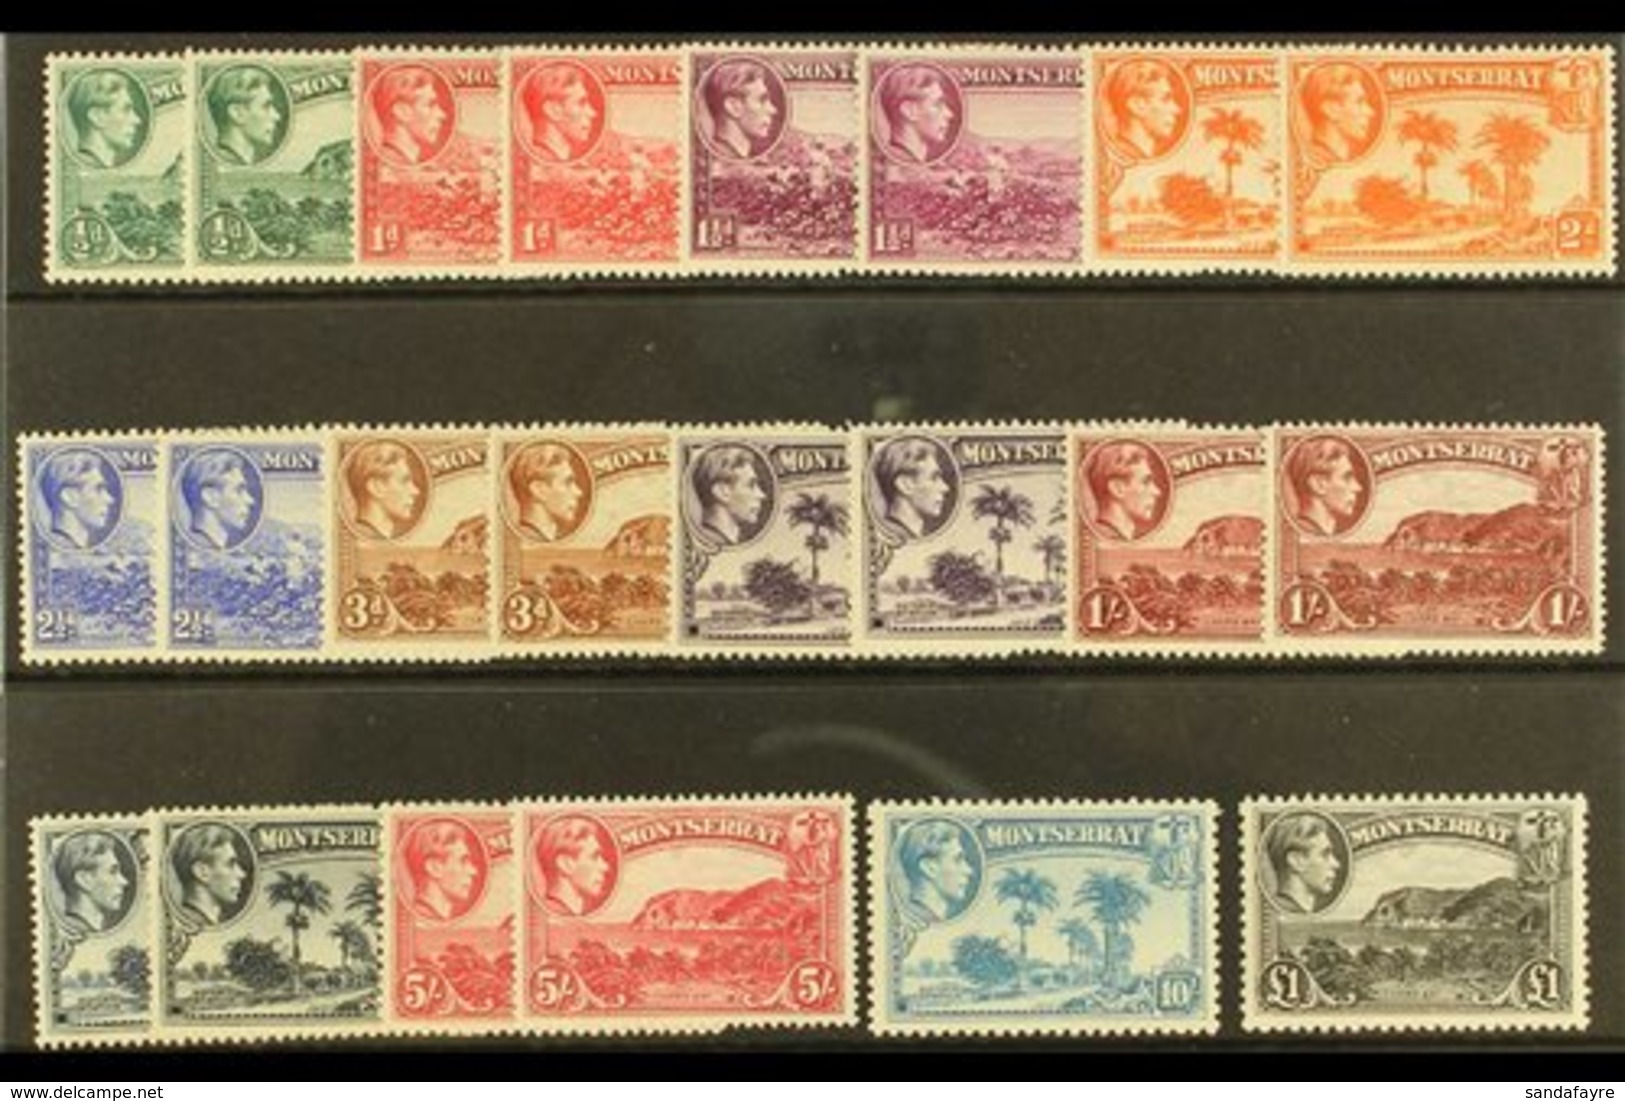 1938-48 Pictorial Definitive Set With ALL Listed Perforation Variants, SG 101/12, Never Hinged Mint (22 Stamps) For More - Montserrat